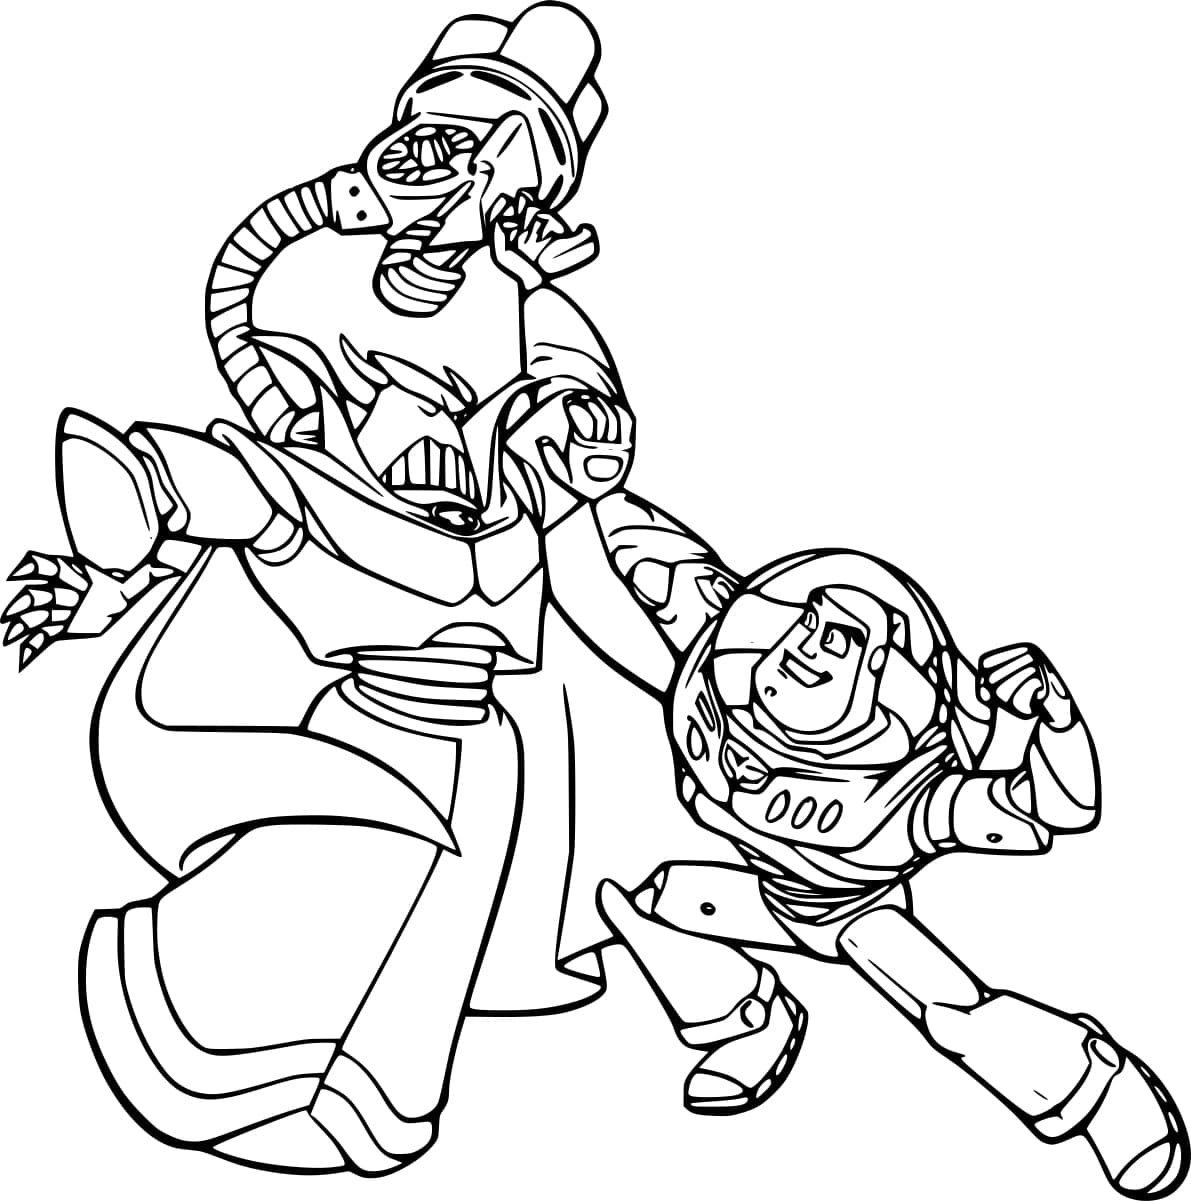 Toy Story 2 Zurg And Buzz Lightyear Coloring Page Download Print Or Color Online For Free